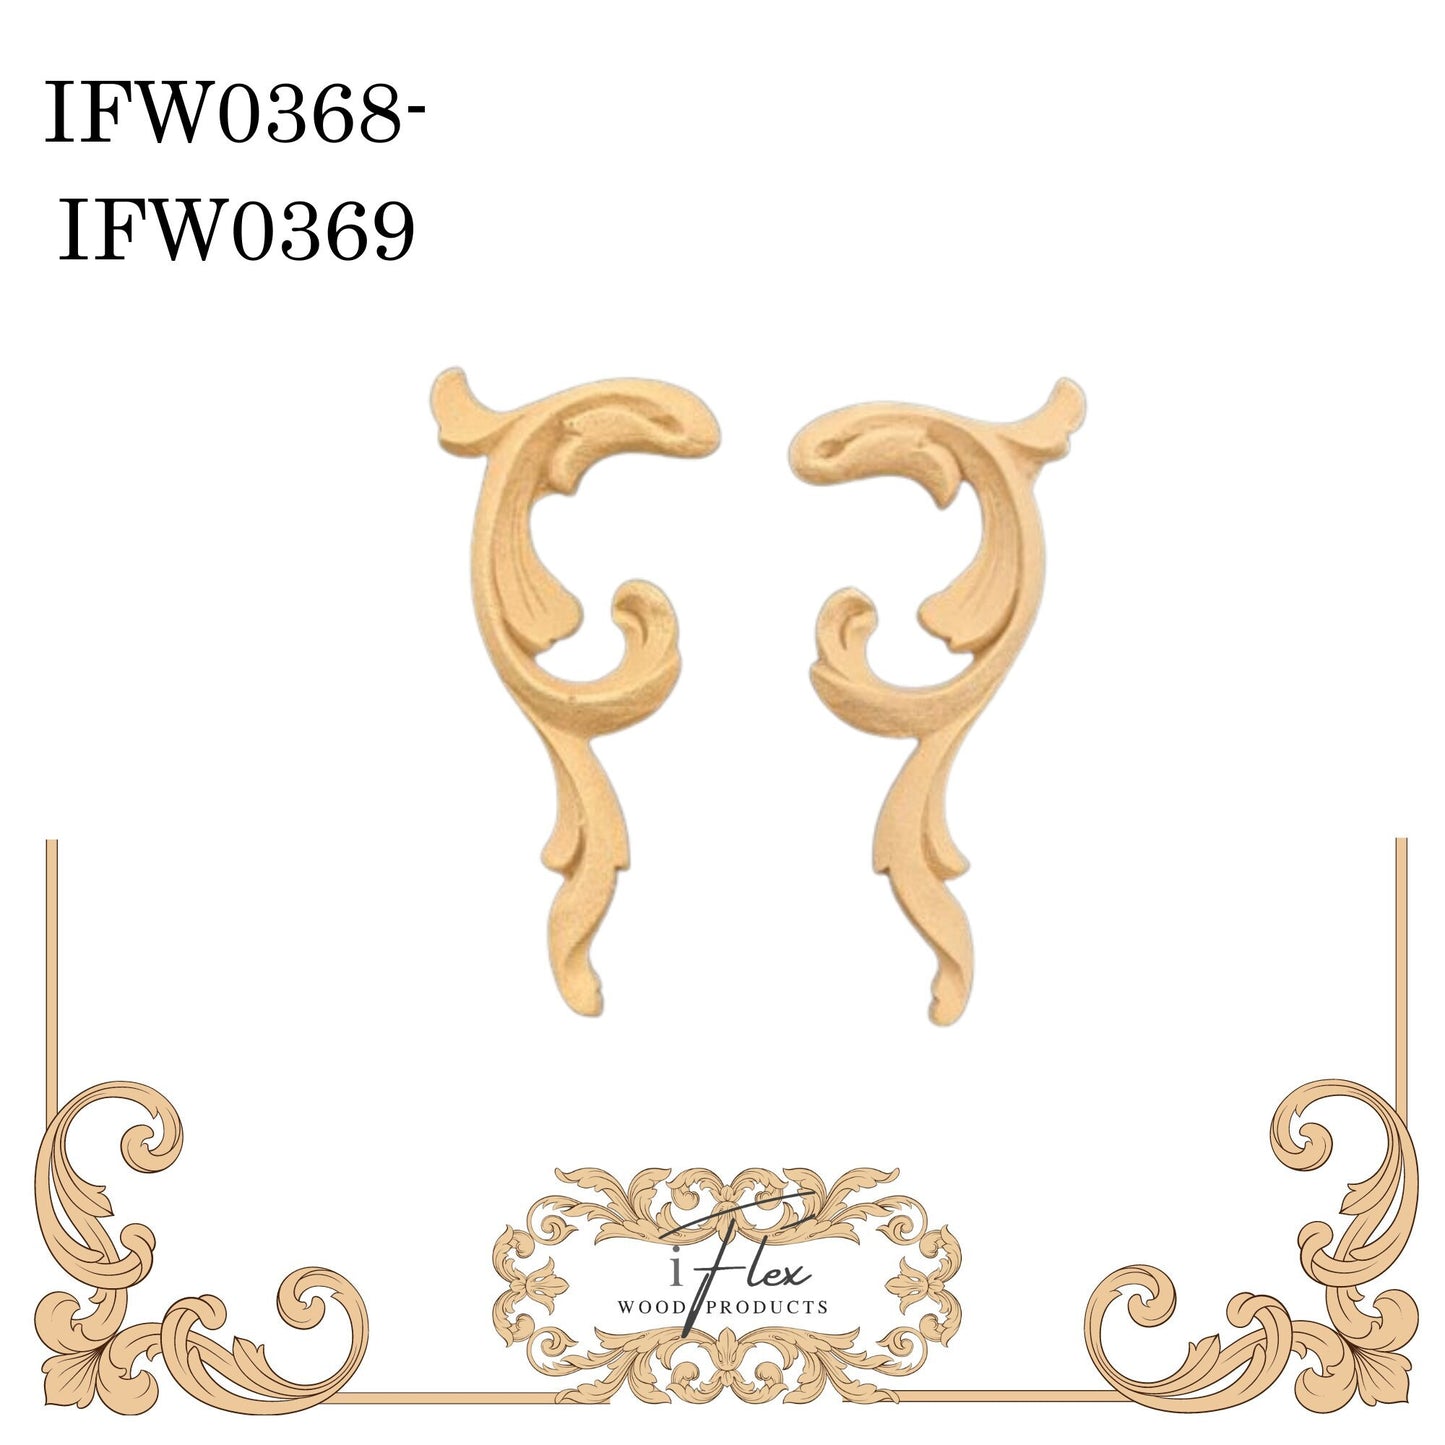 IFW 0368-0369  iFlex Wood Products Pair Scroll bendable mouldings, flexible, wooden appliques